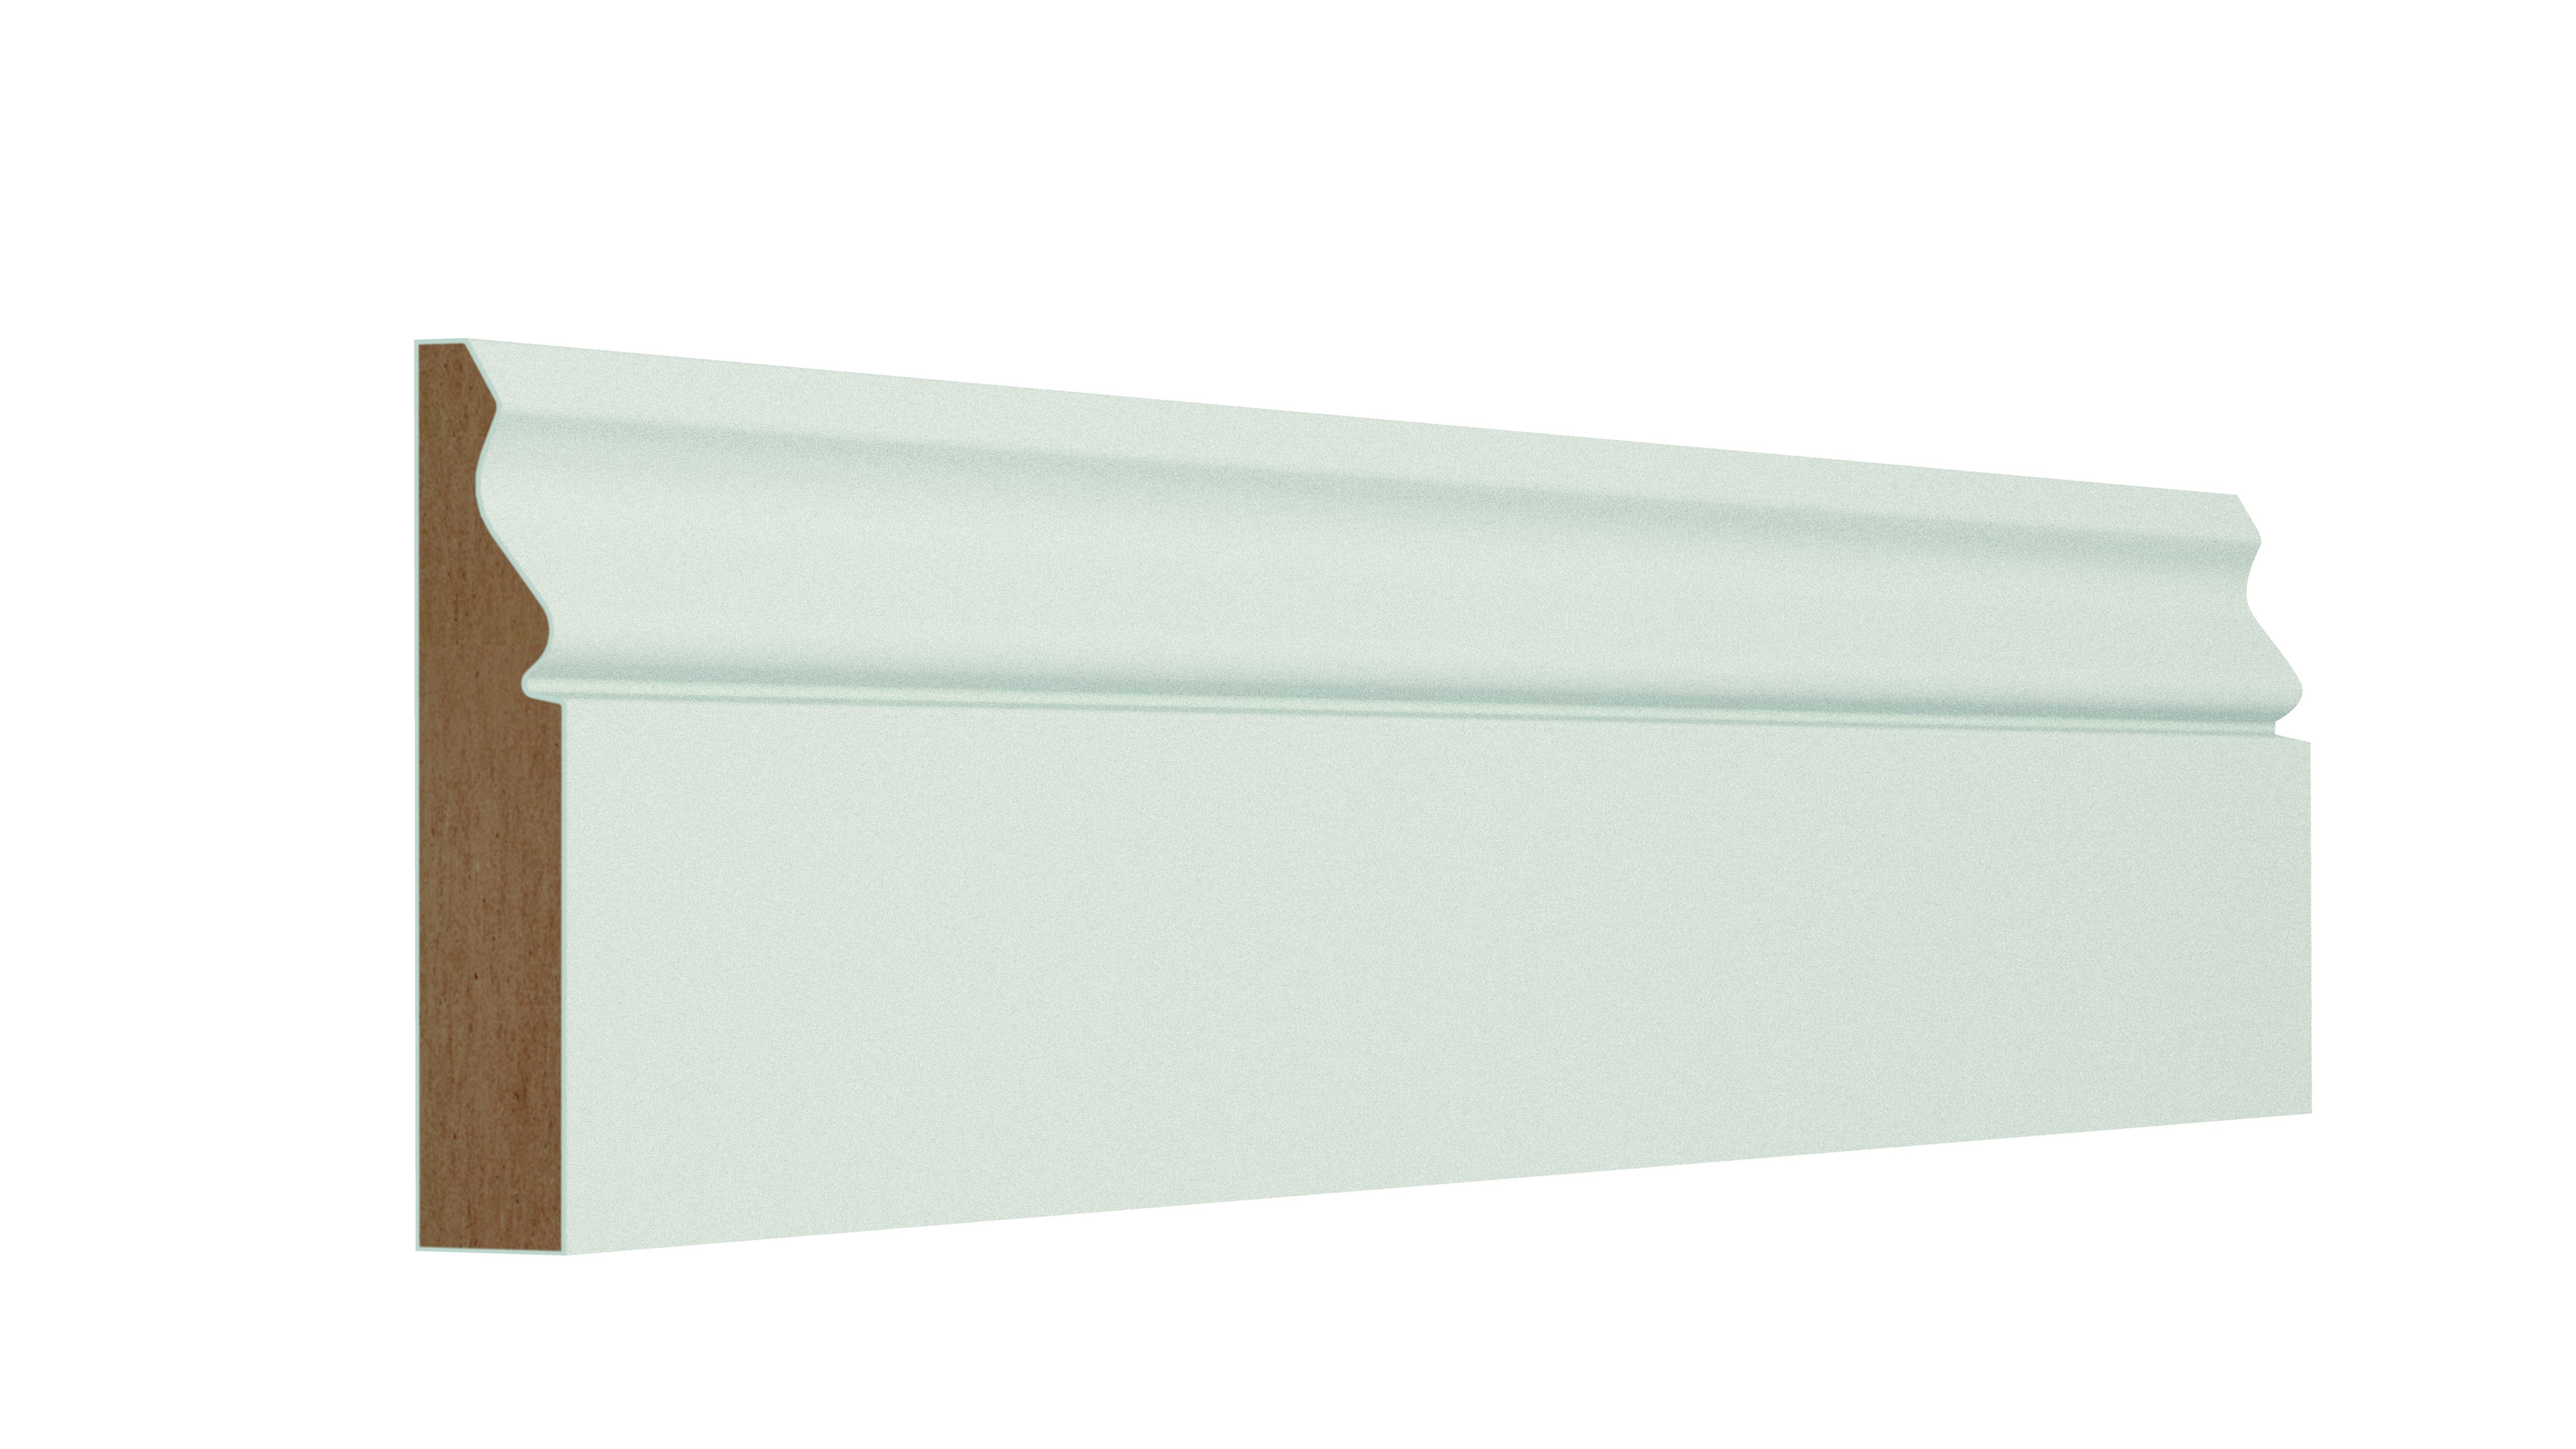 GoodHome White MDF Ogee Skirting board (L)2.4m (W)169mm (T)18mm